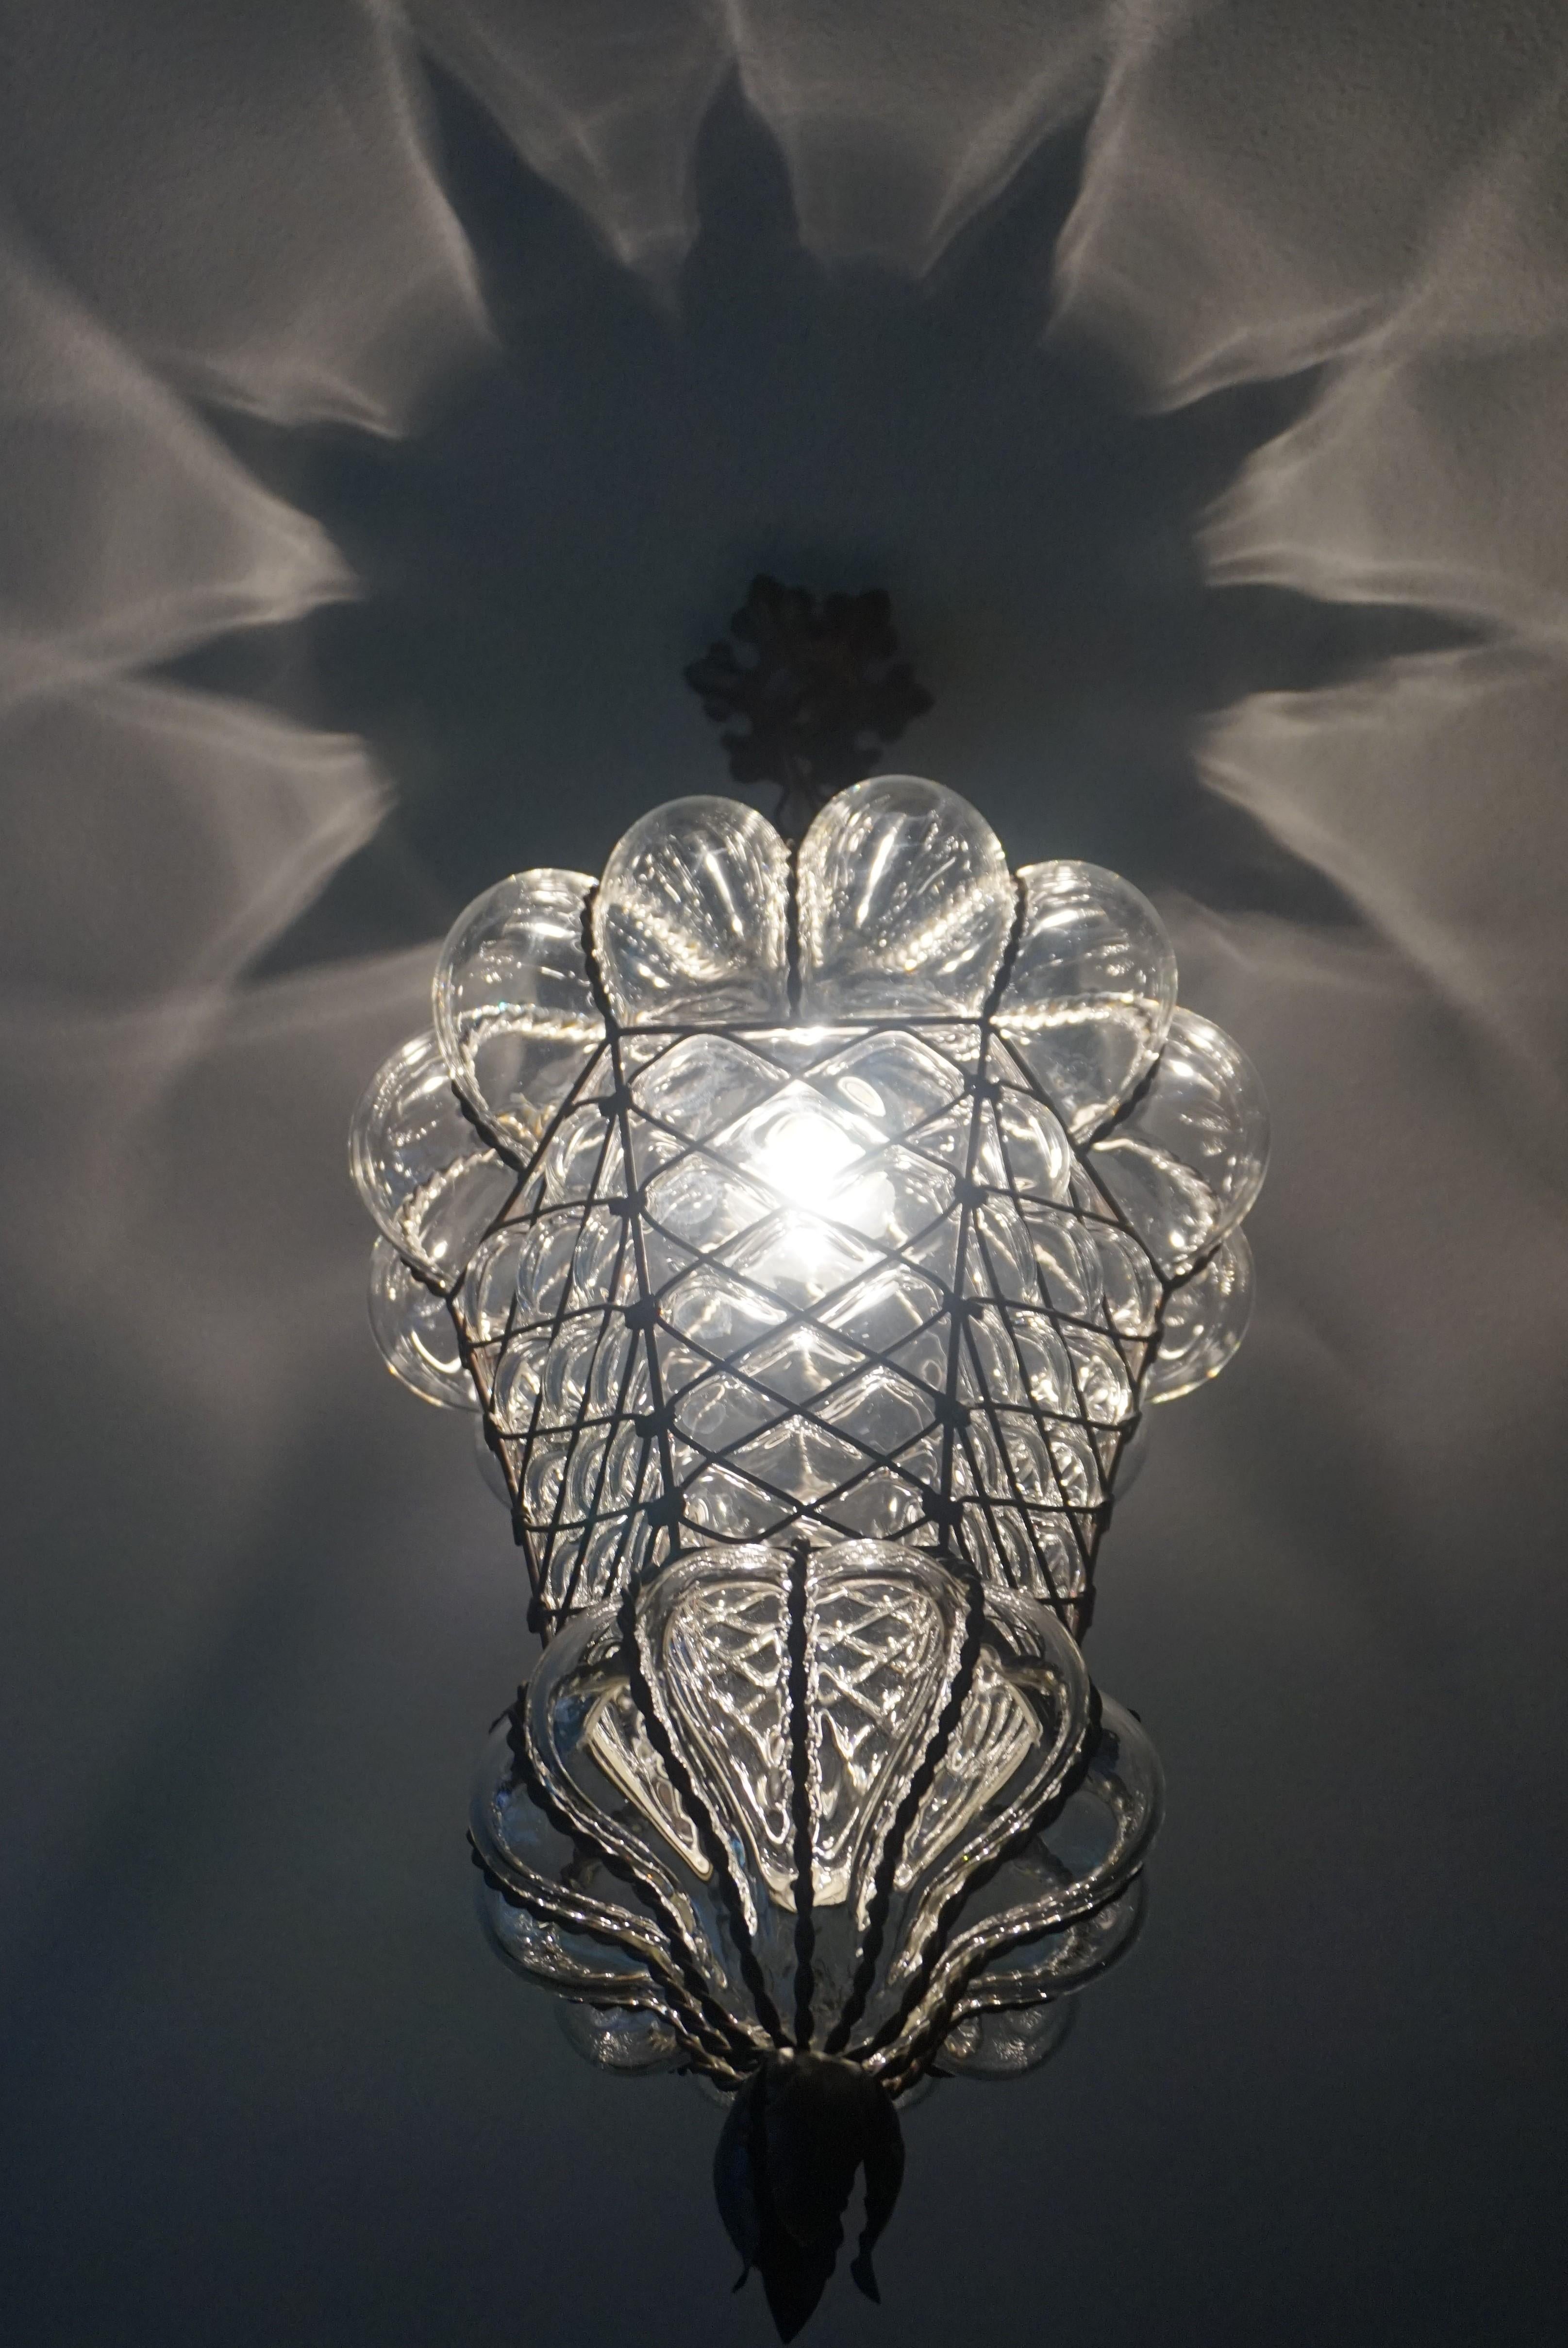 Victorian era, transparent glass and superb condition Venetian light fixture.

This antique Venetian pendant is not only the largest of it's kind we ever had the pleasure of offering, it also is in exceptional condition. We have completely rewired